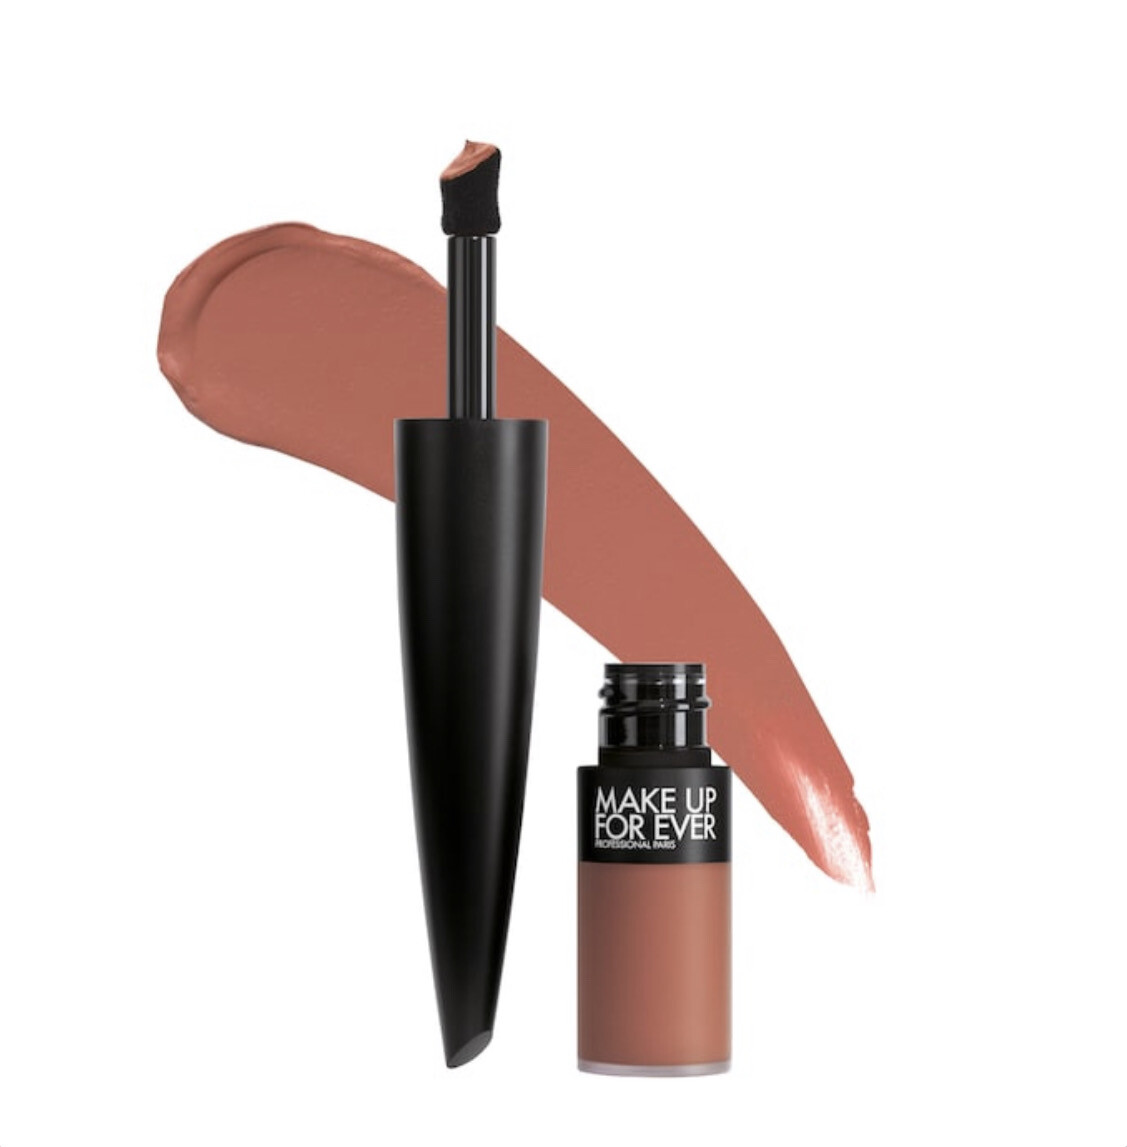 Make Up For Ever - Rouge Artist For Ever Matte 24HR Longwear Liquid Lipstick | 192 Toffee At All Hours - chestnut